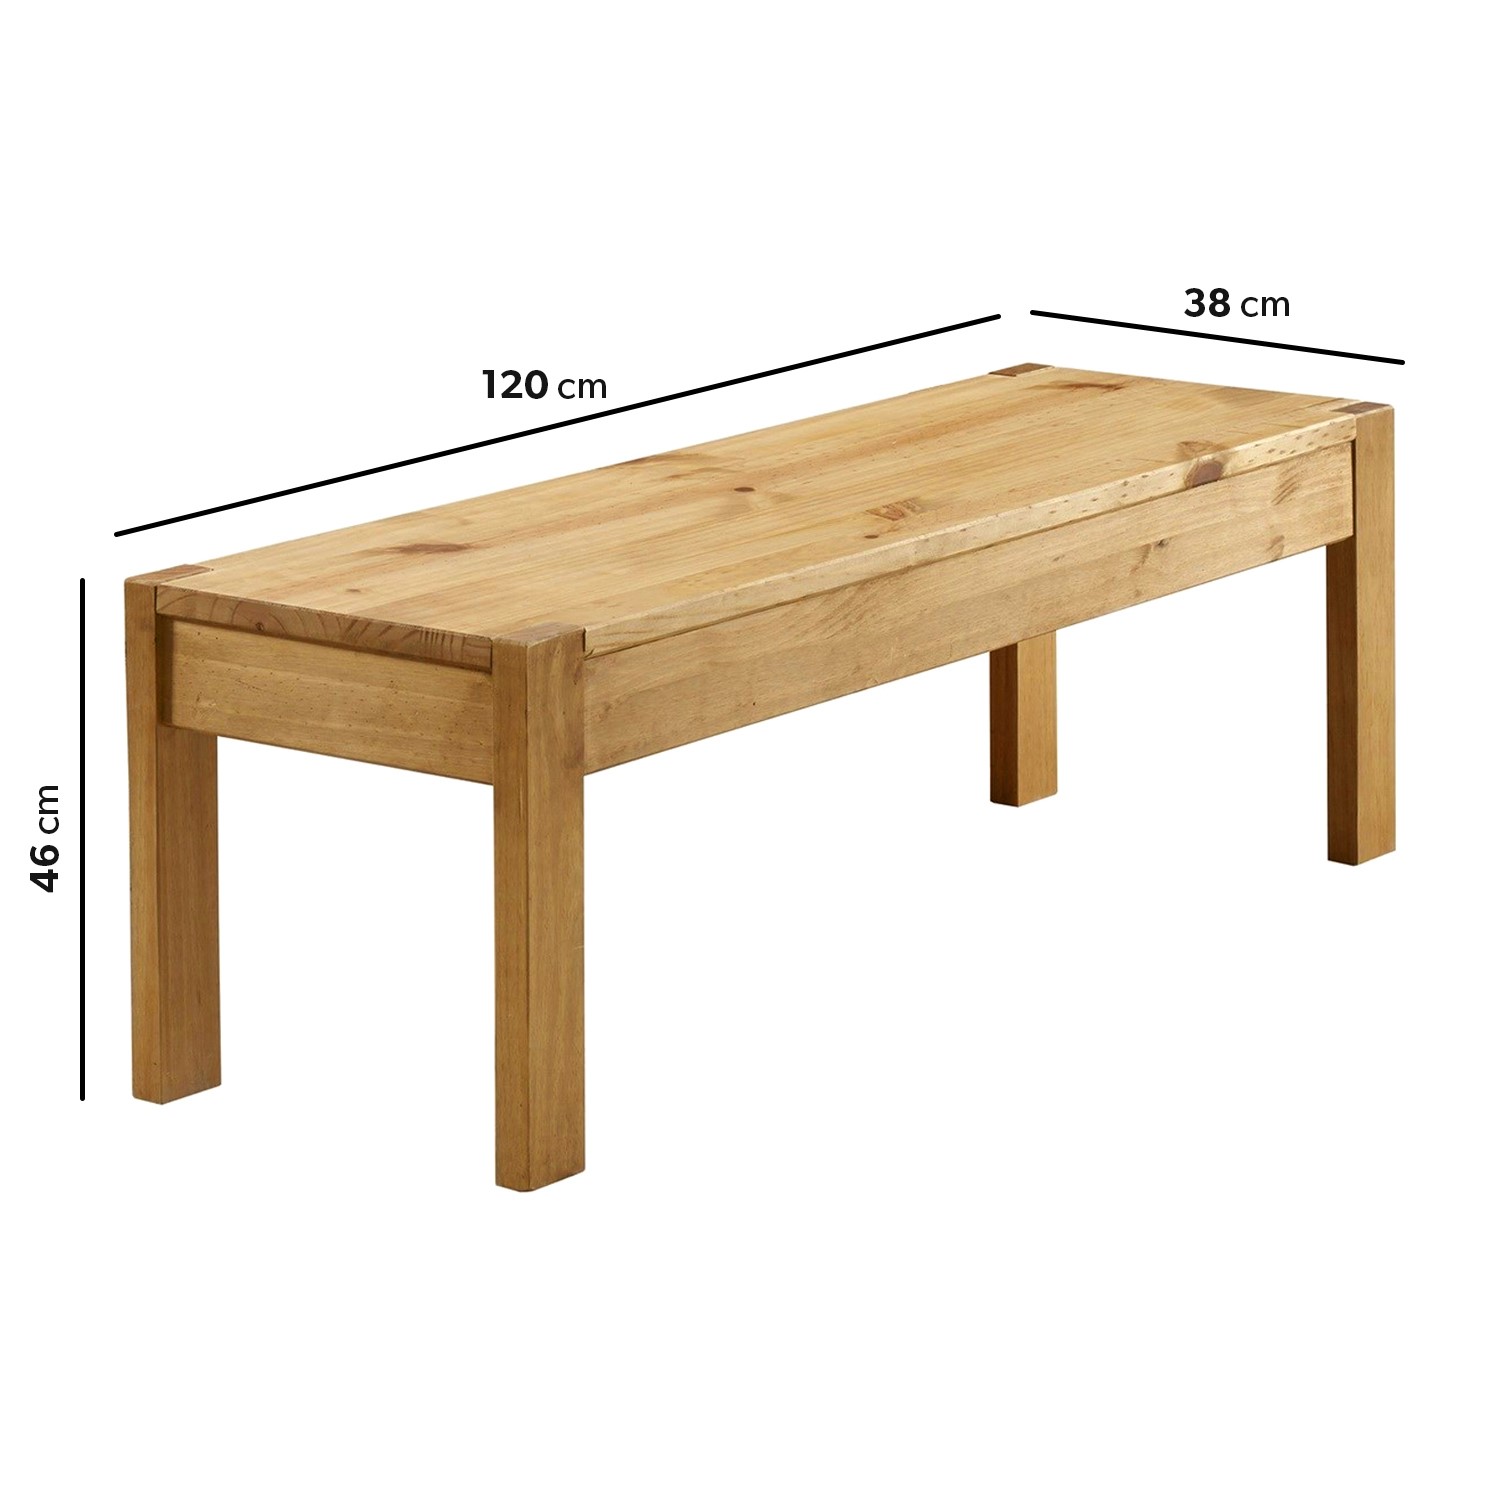 Read more about Large solid pine dining bench seats 2 emerson